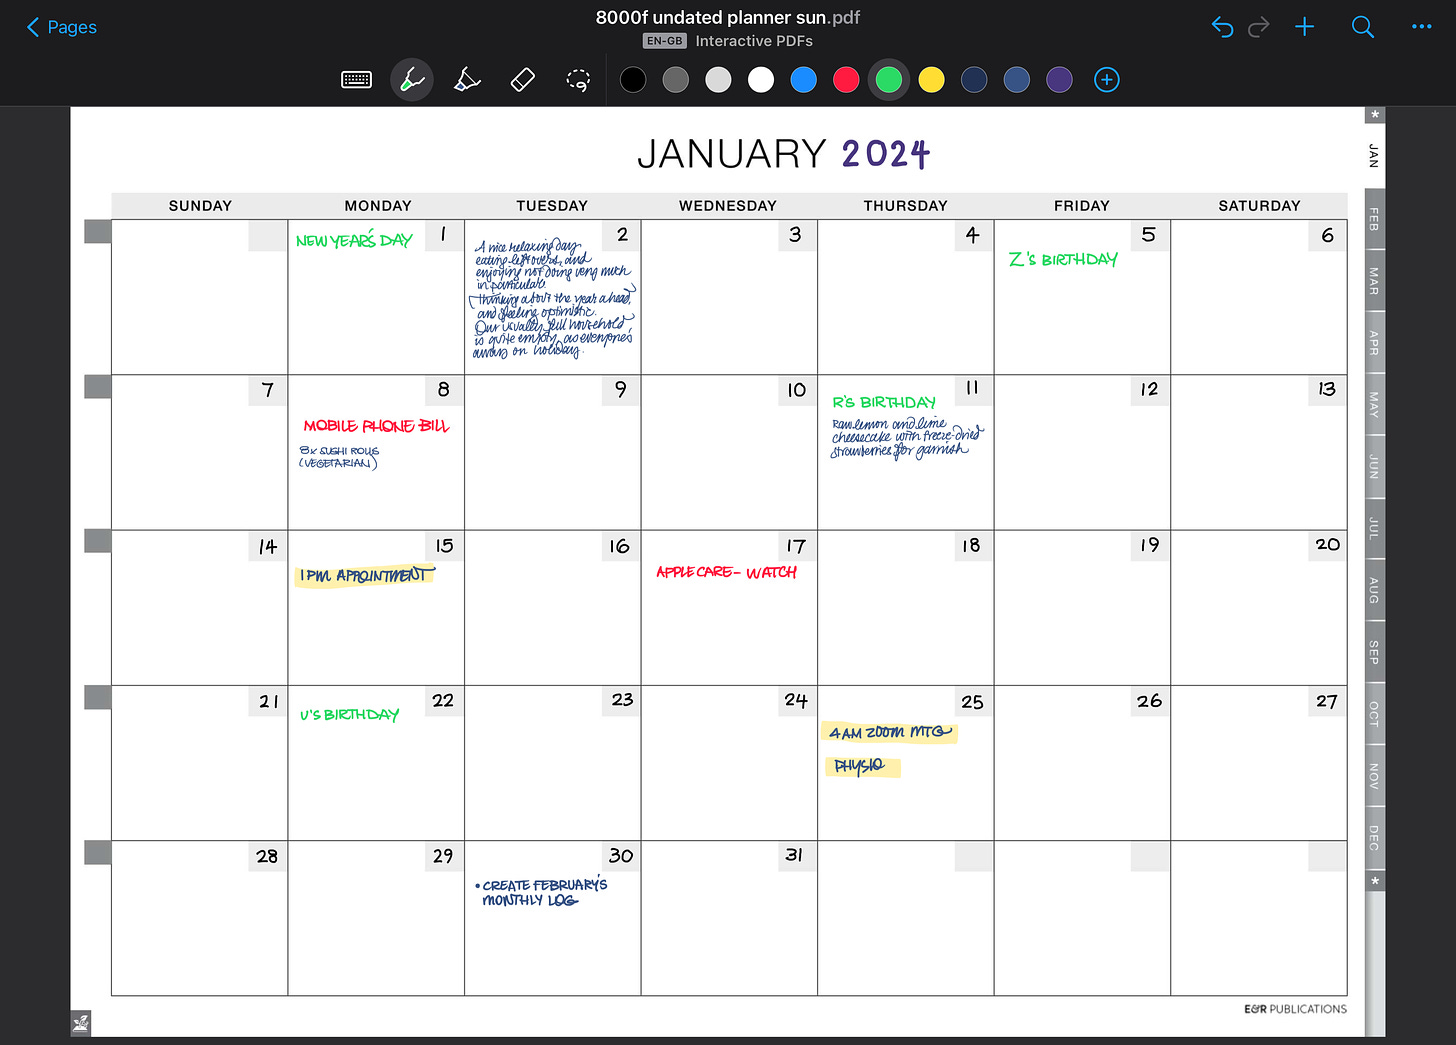 January calendar page on an iPad app, with handwritten events and notes written on some of the dates.